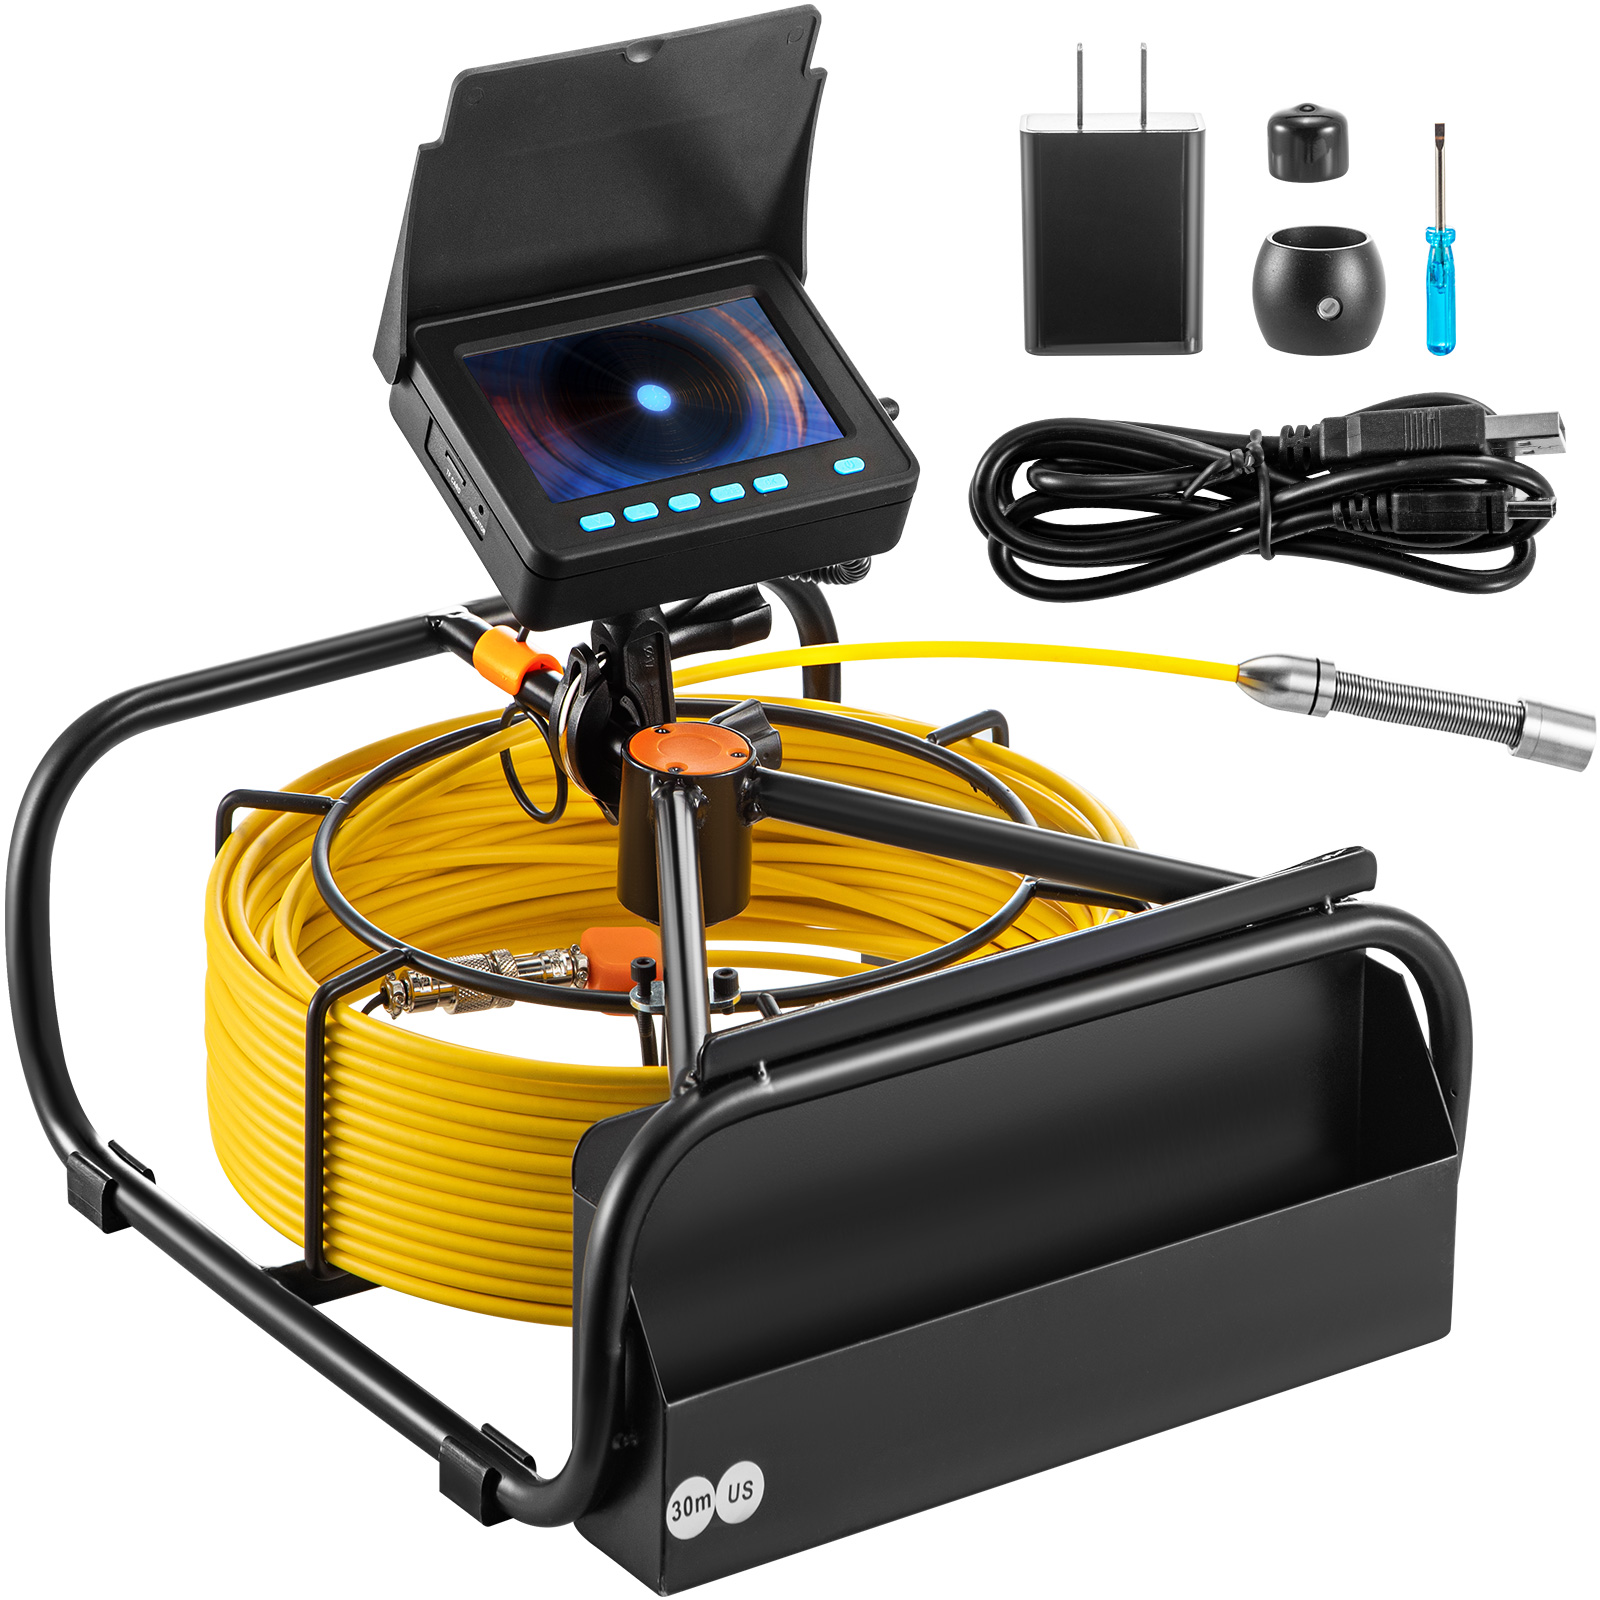 Pipe Inspection Camera, 20M / 65.6FT Cable, 4.3 In. Monitor